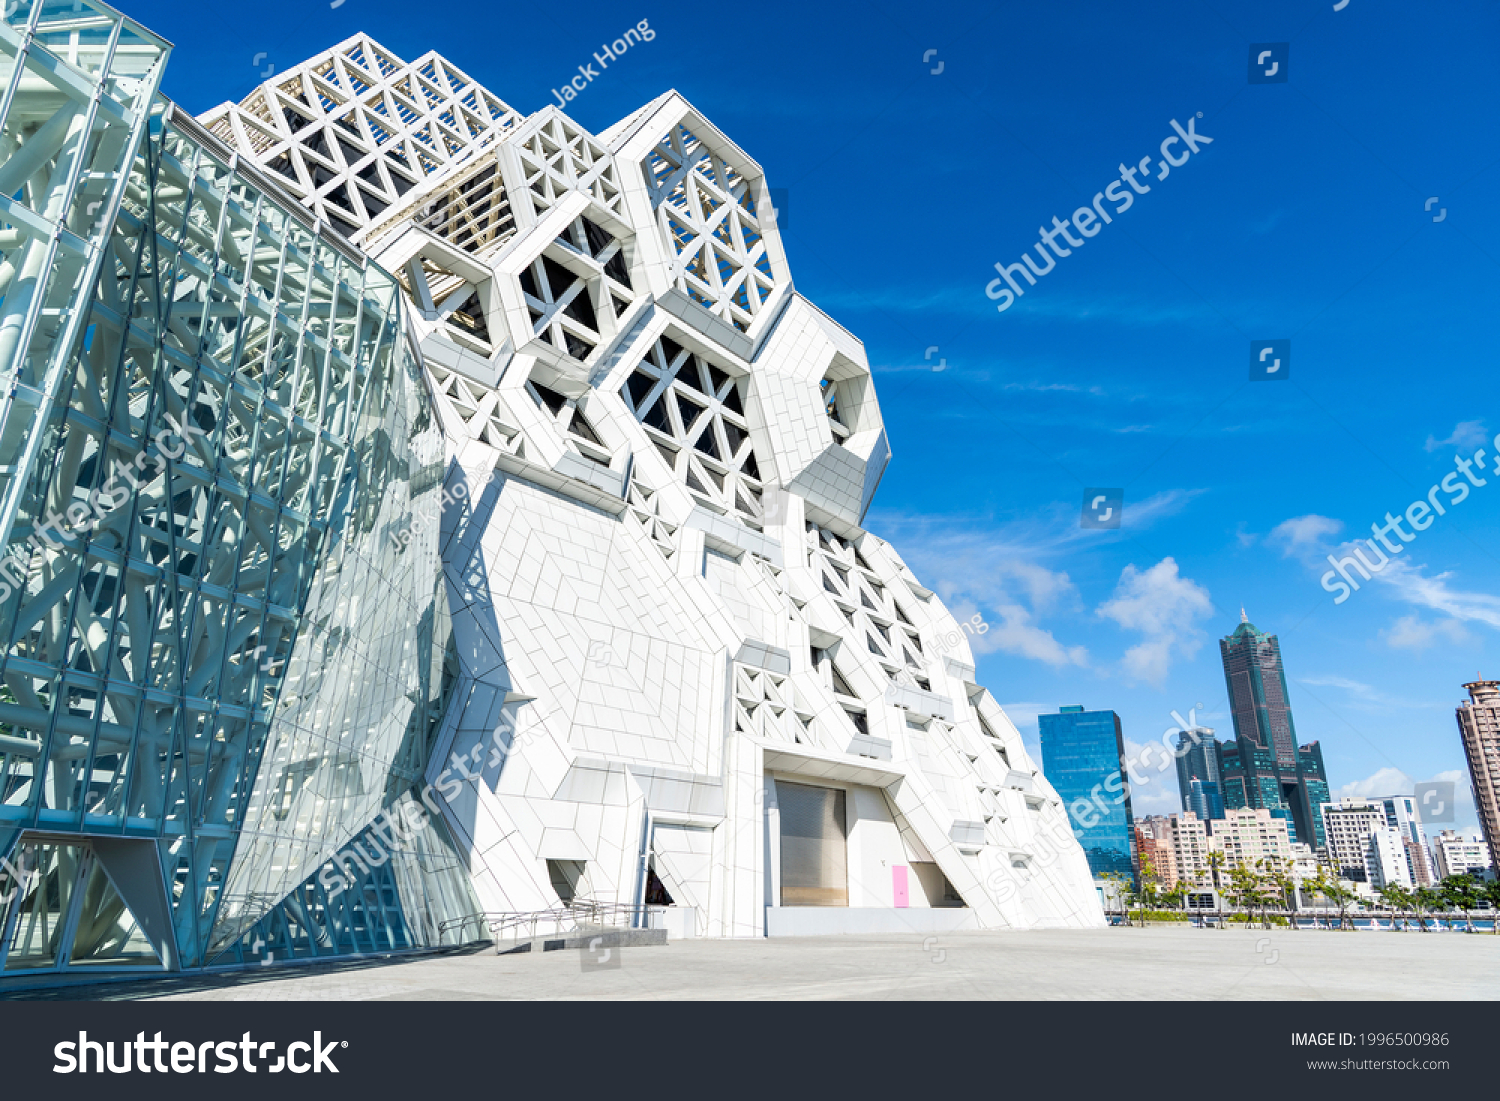 Kaohsiung, Taiwan- May 8, 2021: Kaohsiung Music Center with the view from Love River. The white hexagonal building structure on the riverbank in Kaohsiung, Taiwan. #1996500986